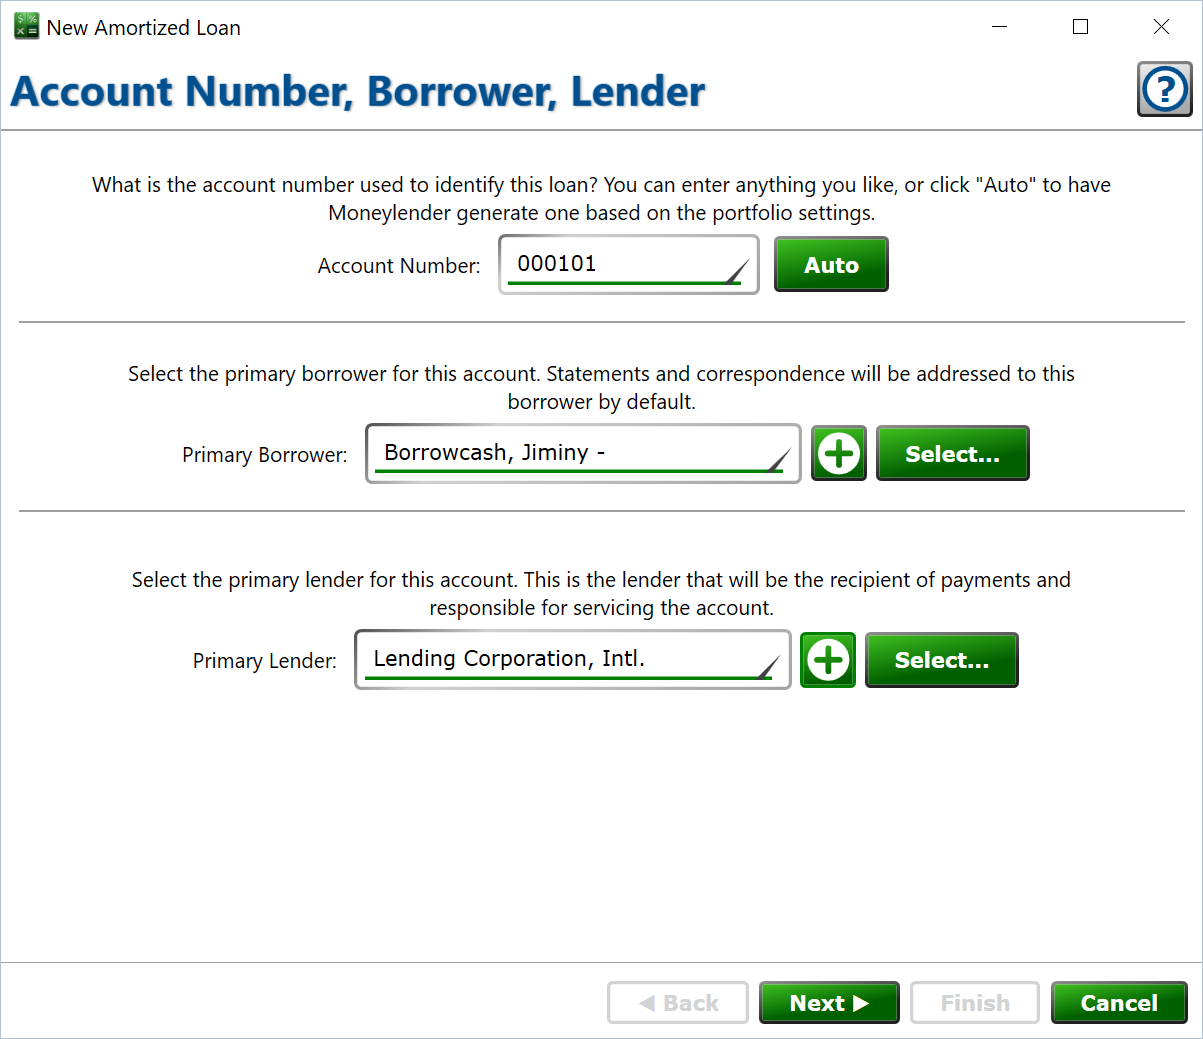 Screenshot of the form to set the account number, borrower, and lender on the loan.